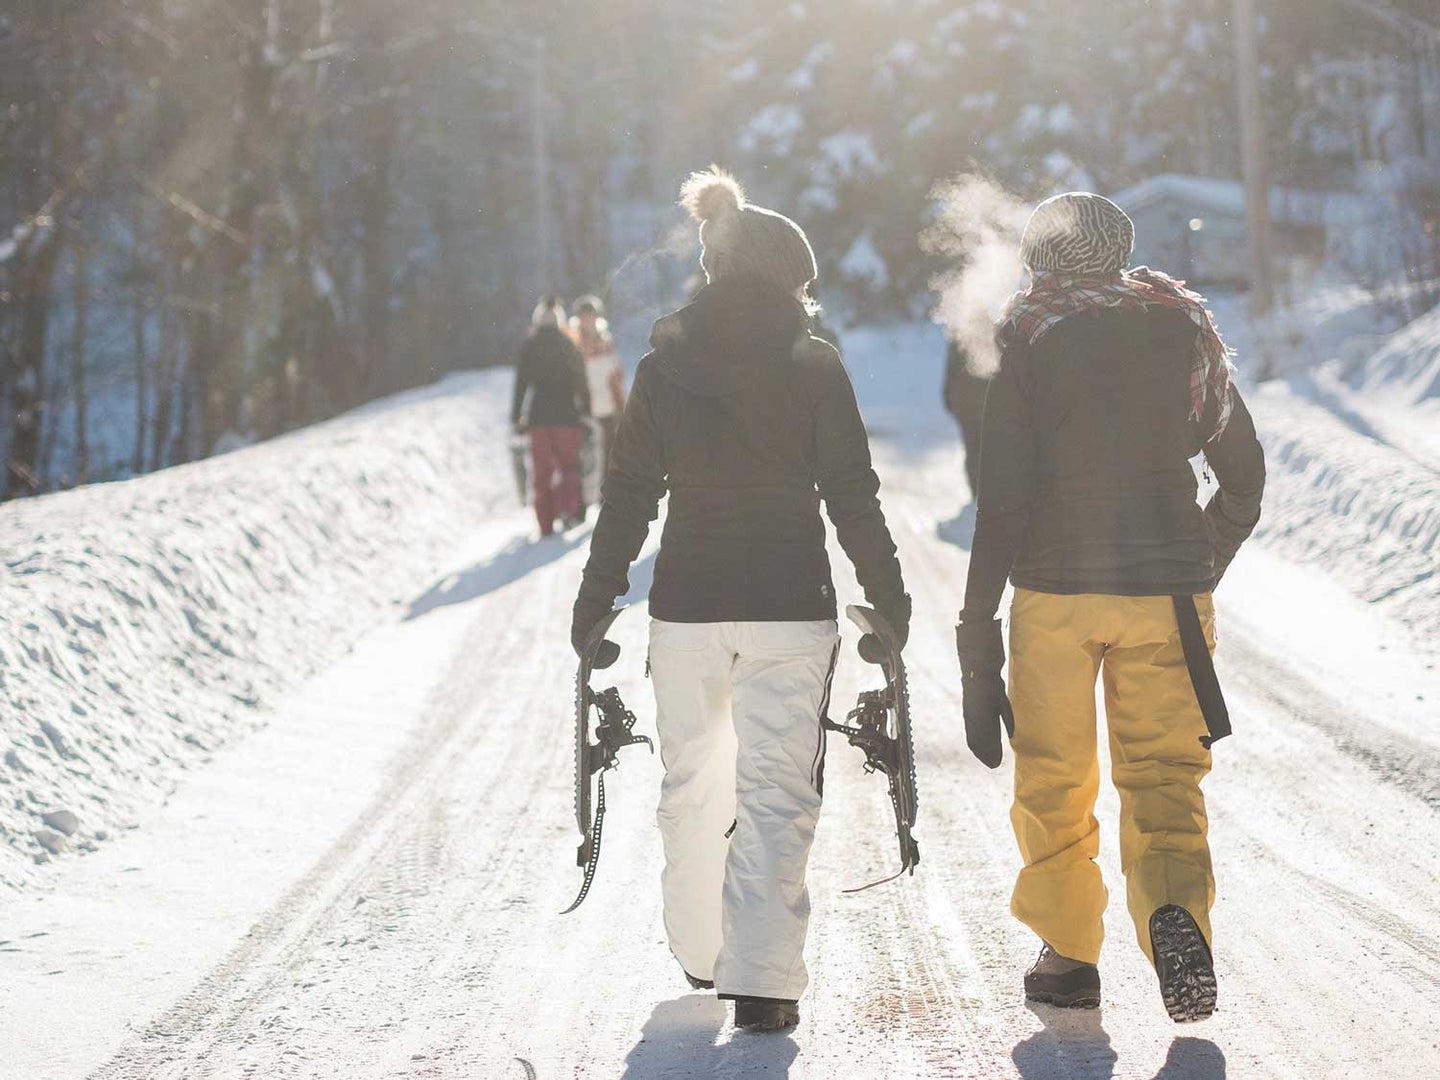 Man and woman hiking while carrying snowshoes and wearing long underwear to stay warm.